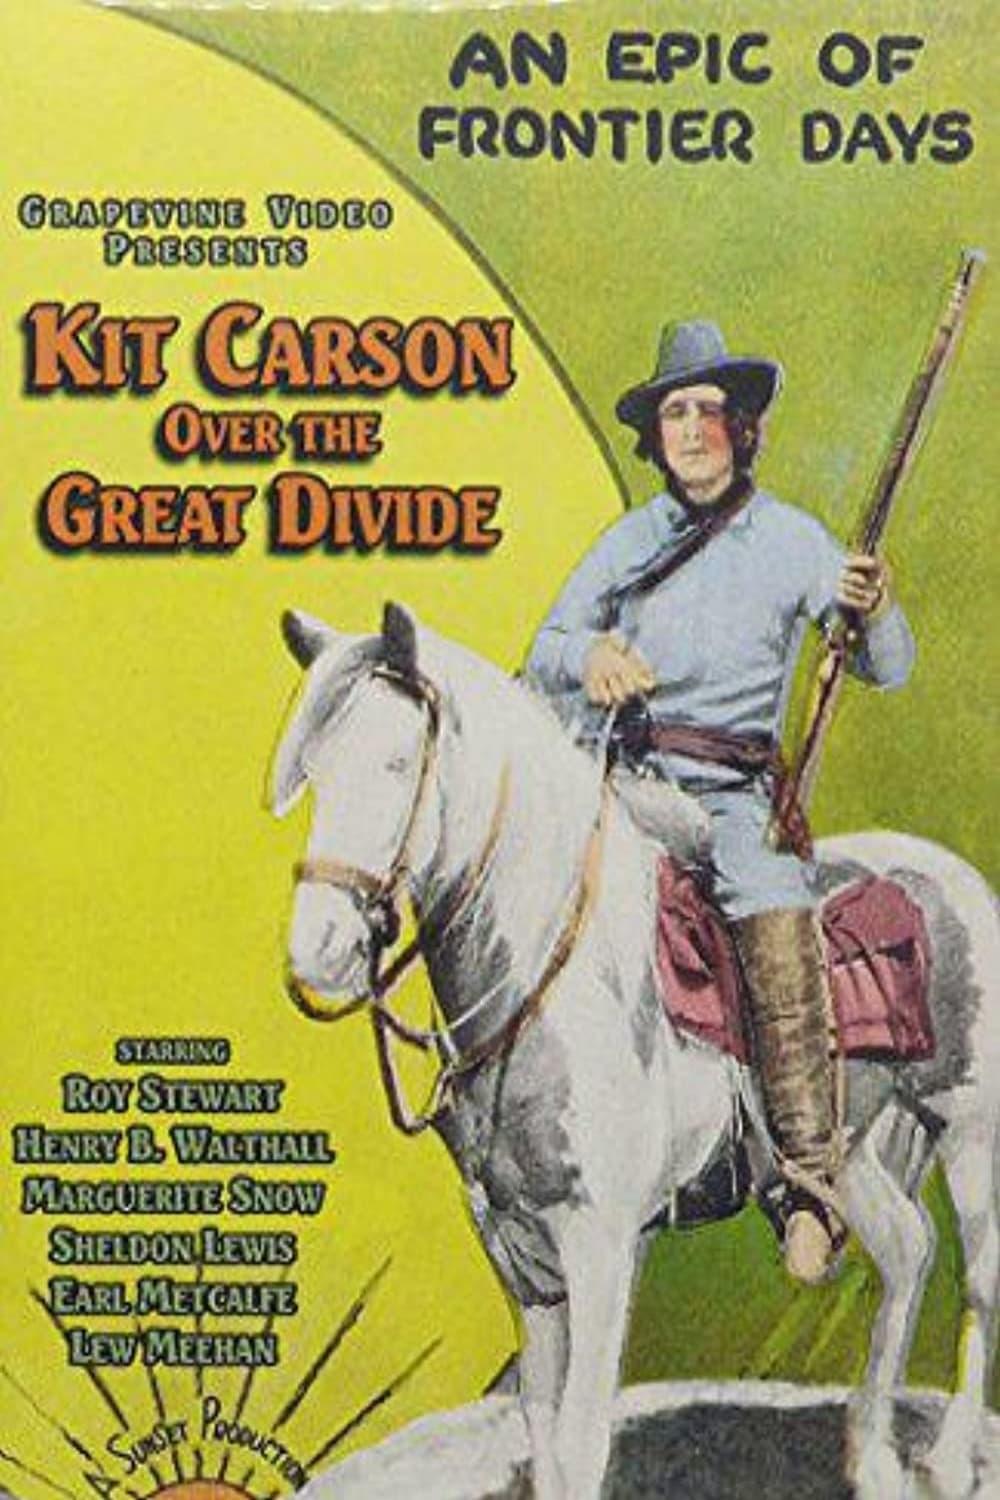 Kit Carson Over the Great Divide poster